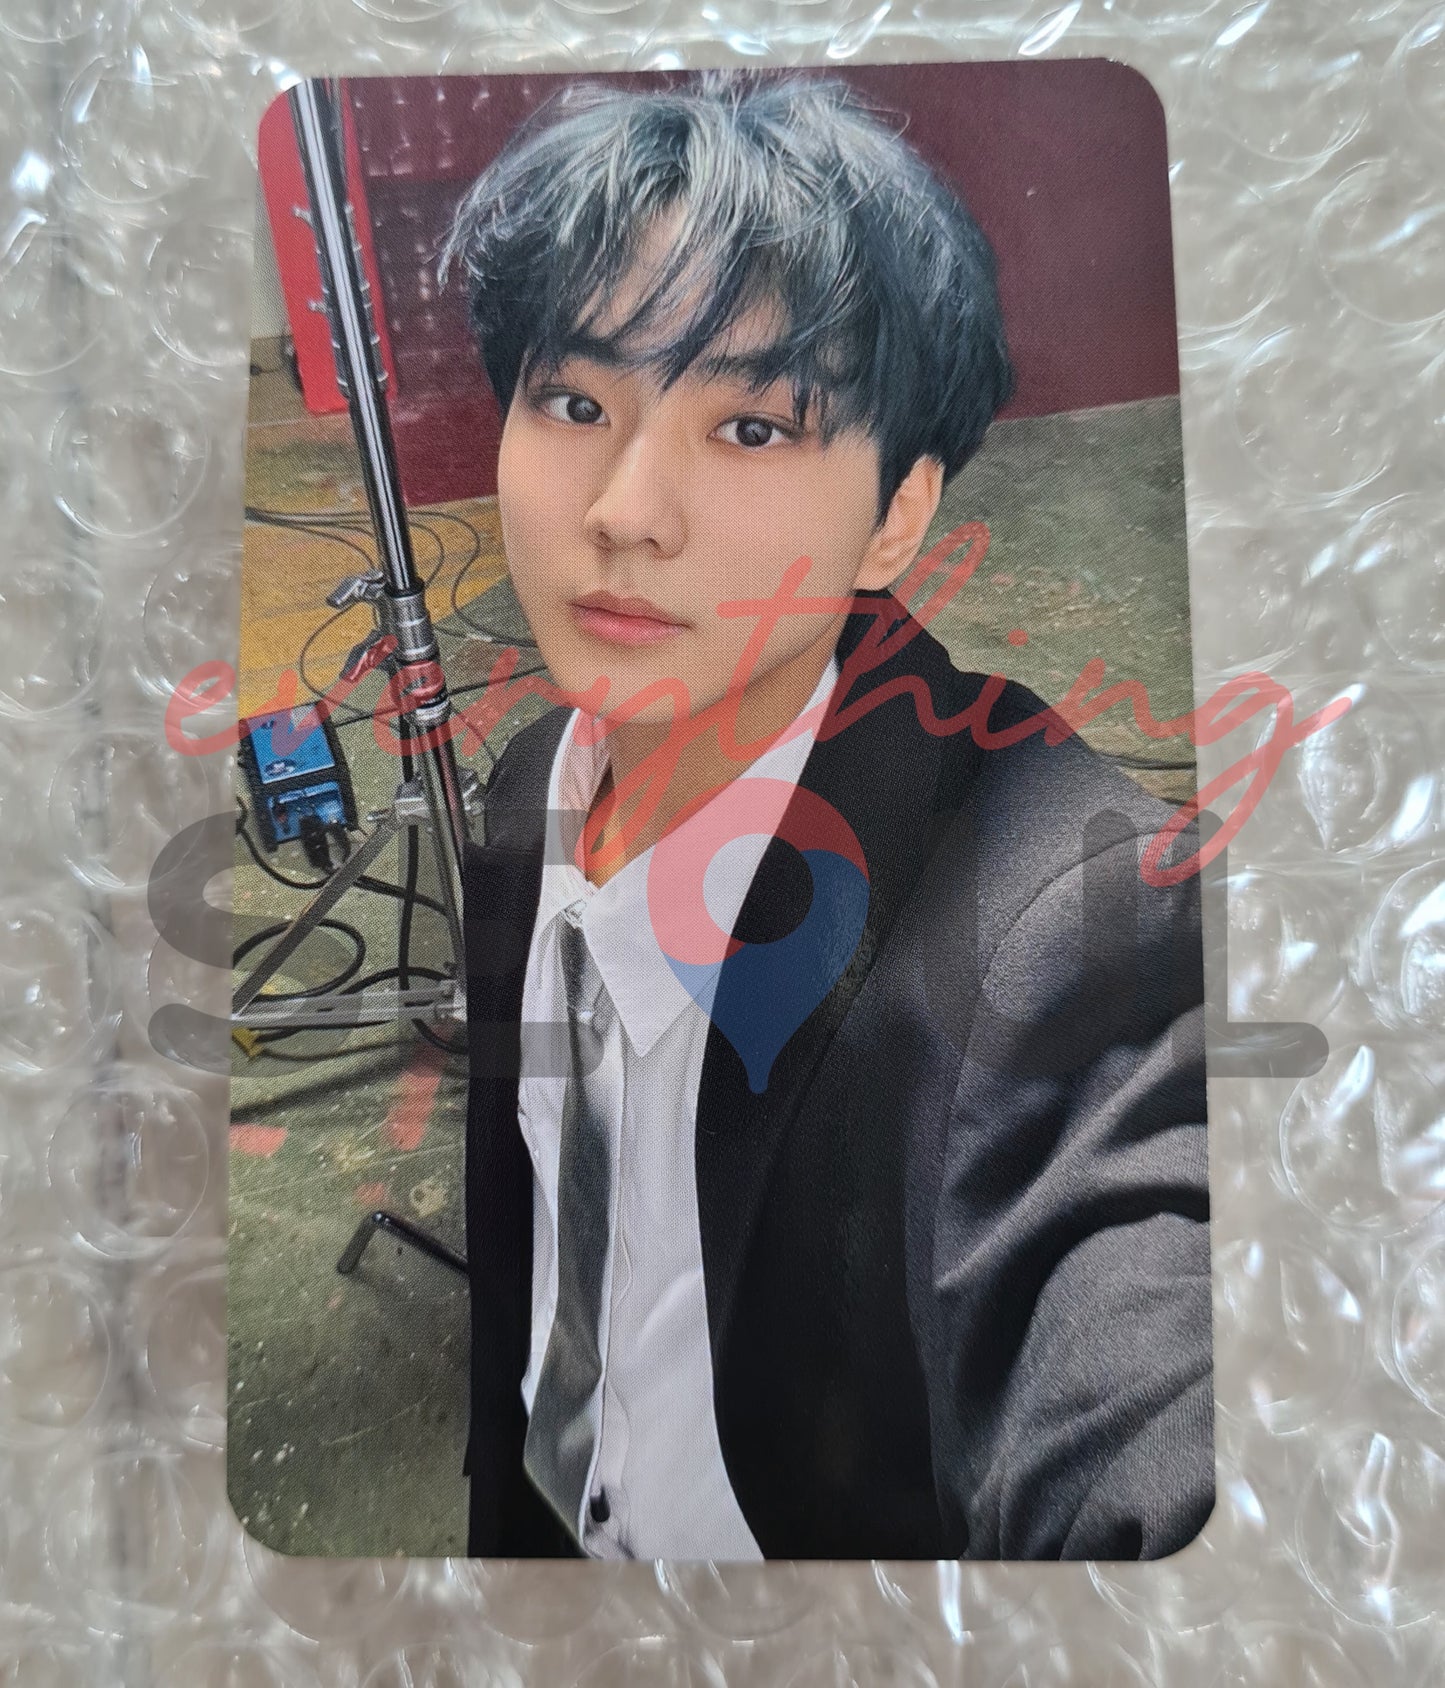 ENHYPEN Dimension : Answer Blessed-Cursed Photocards